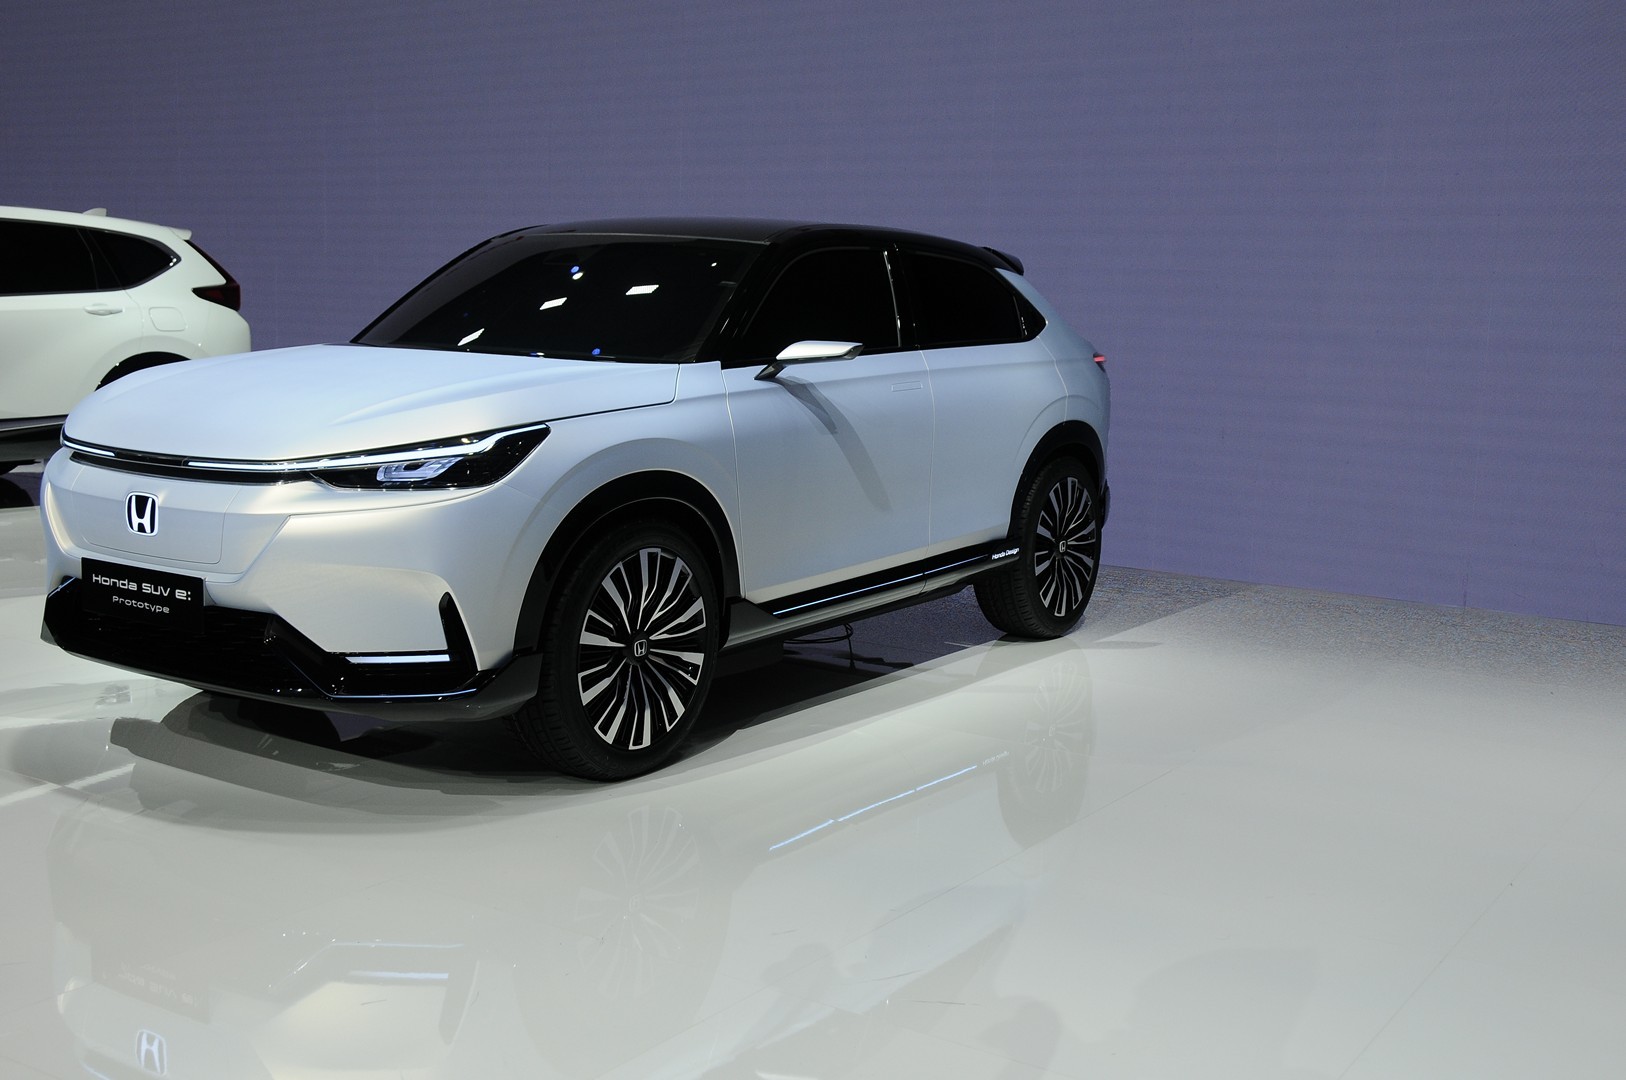 Download Honda Reveals Electric SUV Prototype in China, Looks Like the New HR-V - autoevolution